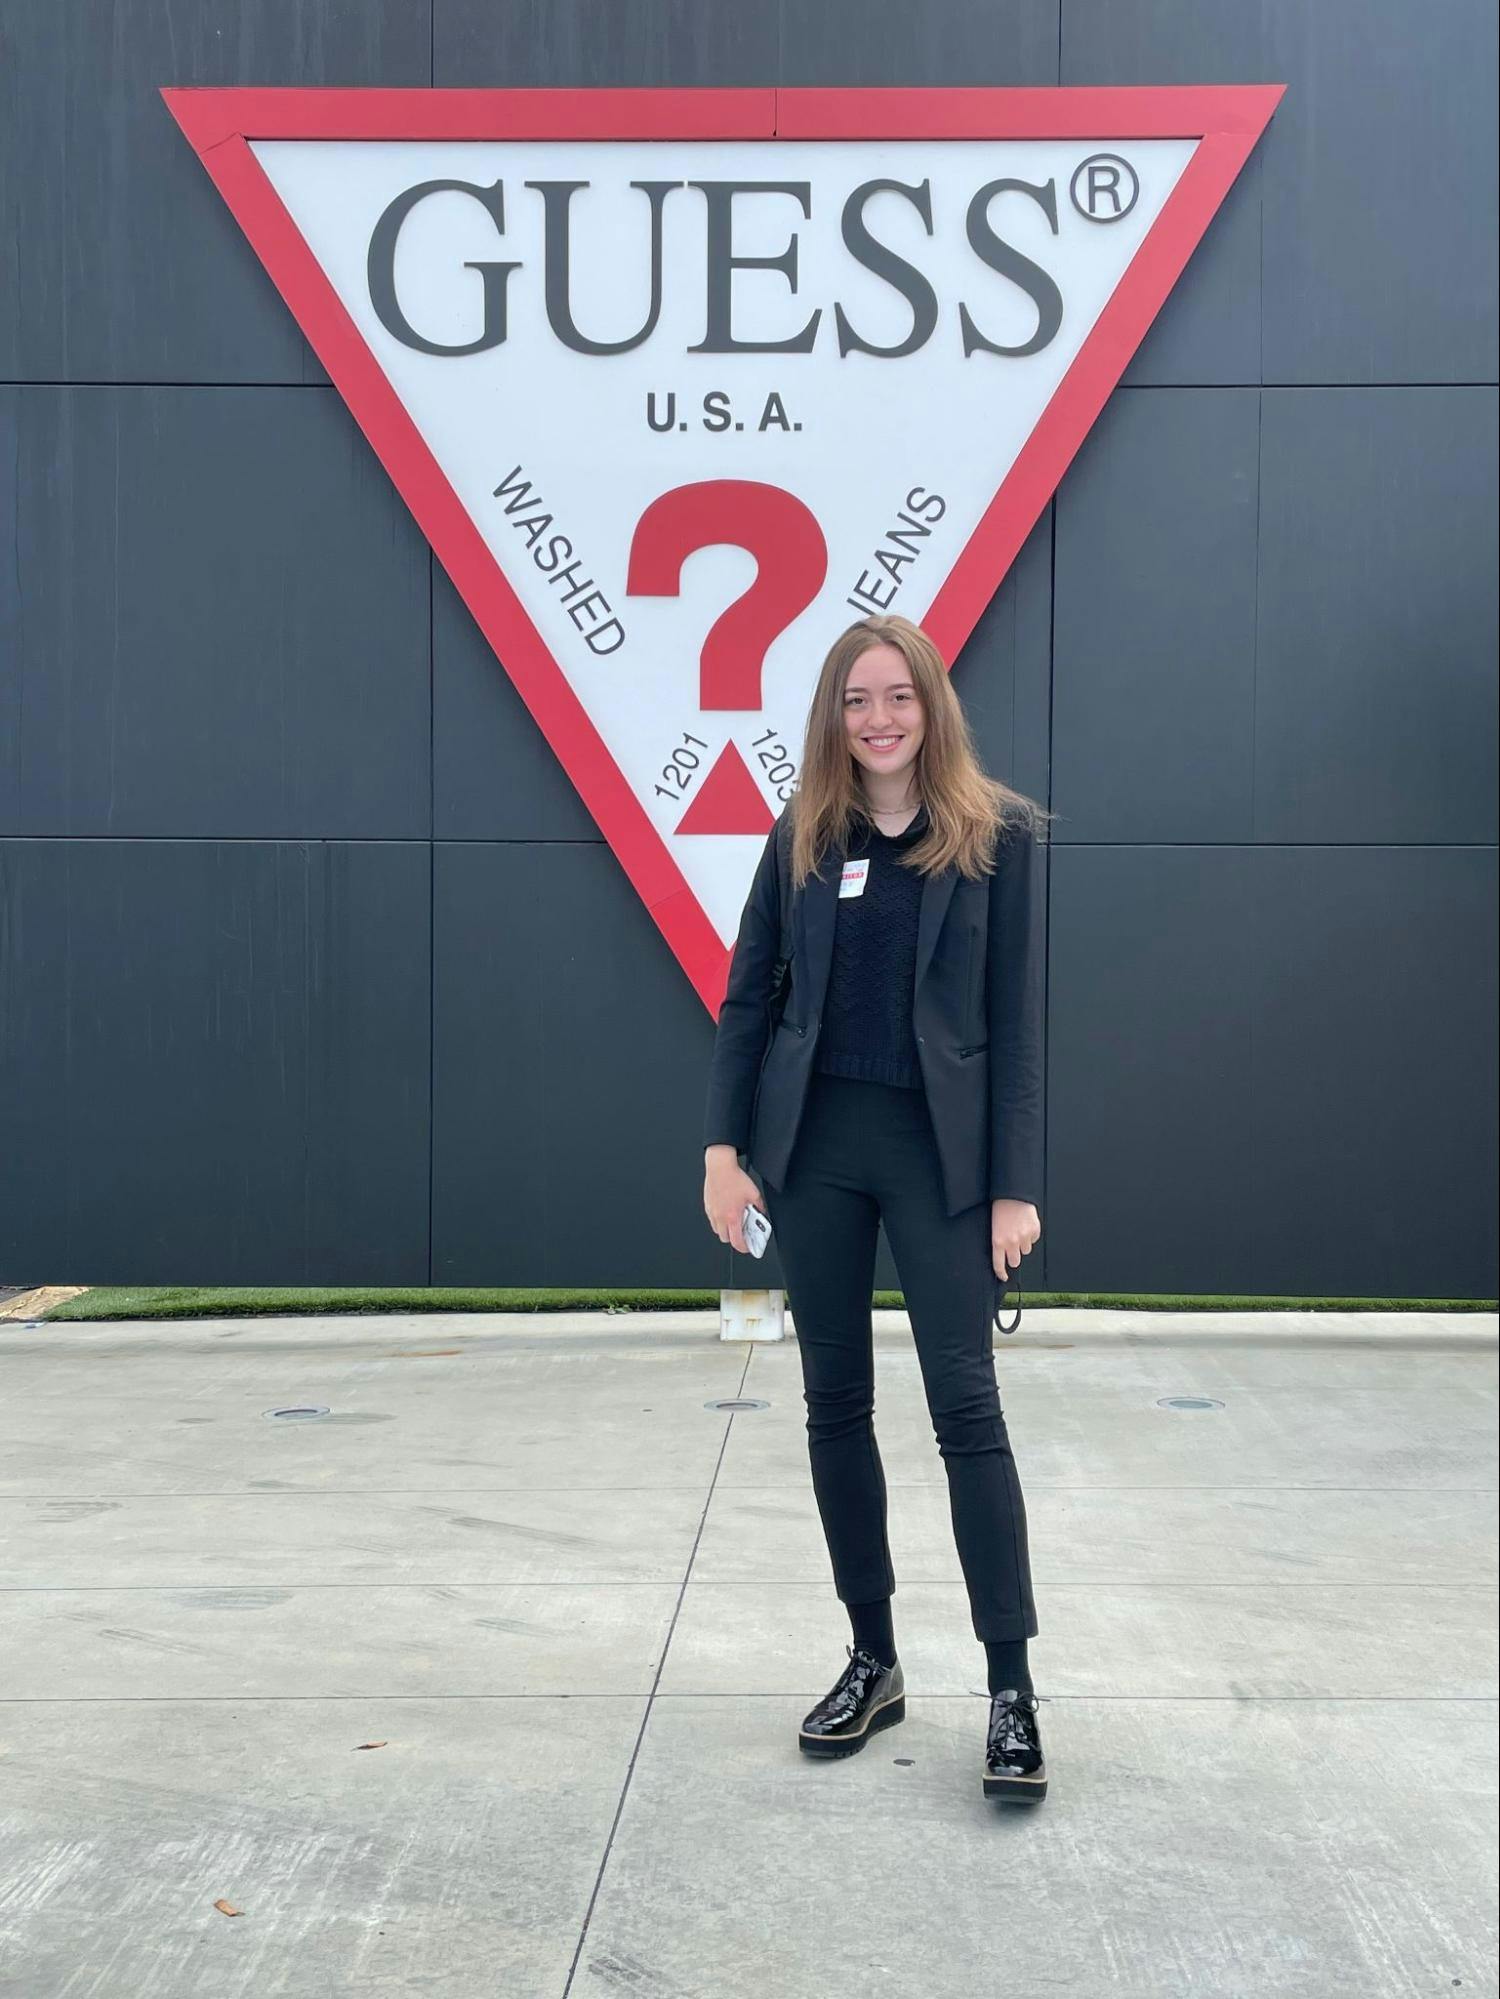 A young woman poses in front of a Guess sign